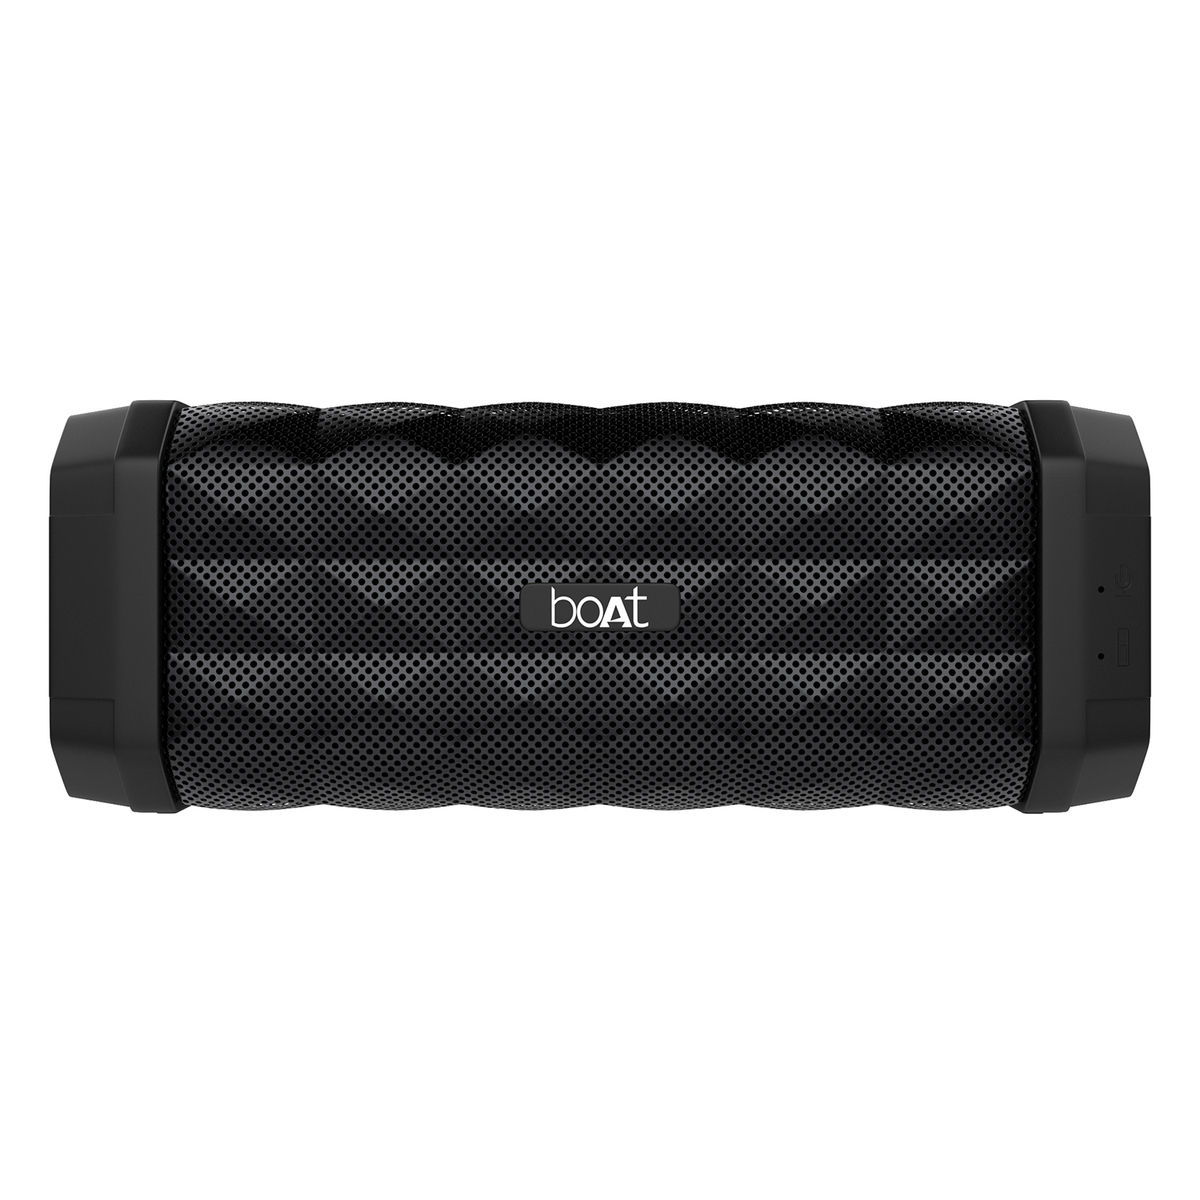 boAt Stone 650 N Portable Wireless Speaker with 10W Stereo Sound, IPX5 Water Resistance(Black)